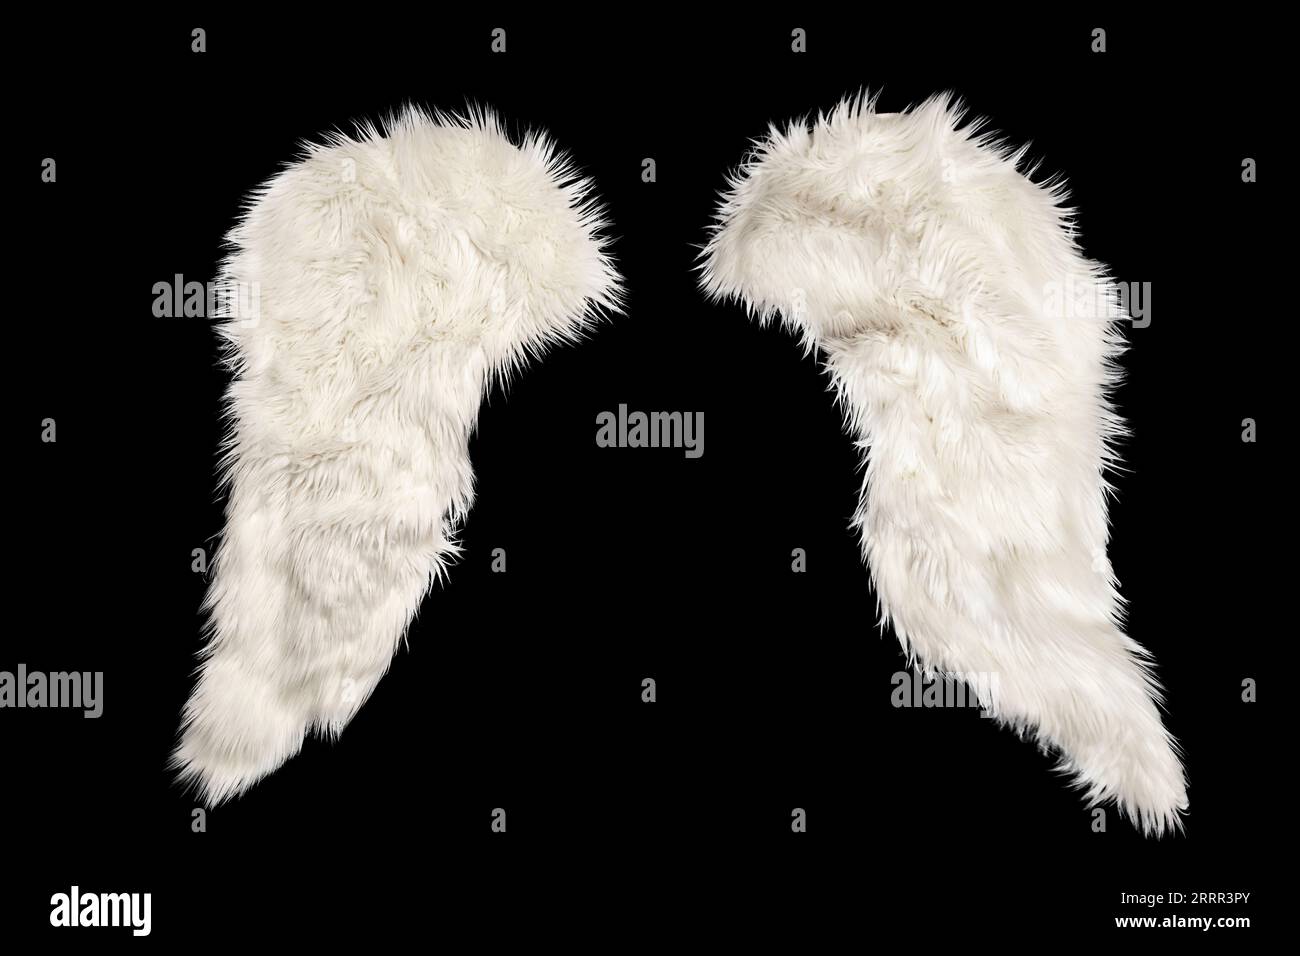 two white furry wings isolated on  black background, festive mockup element Stock Photo